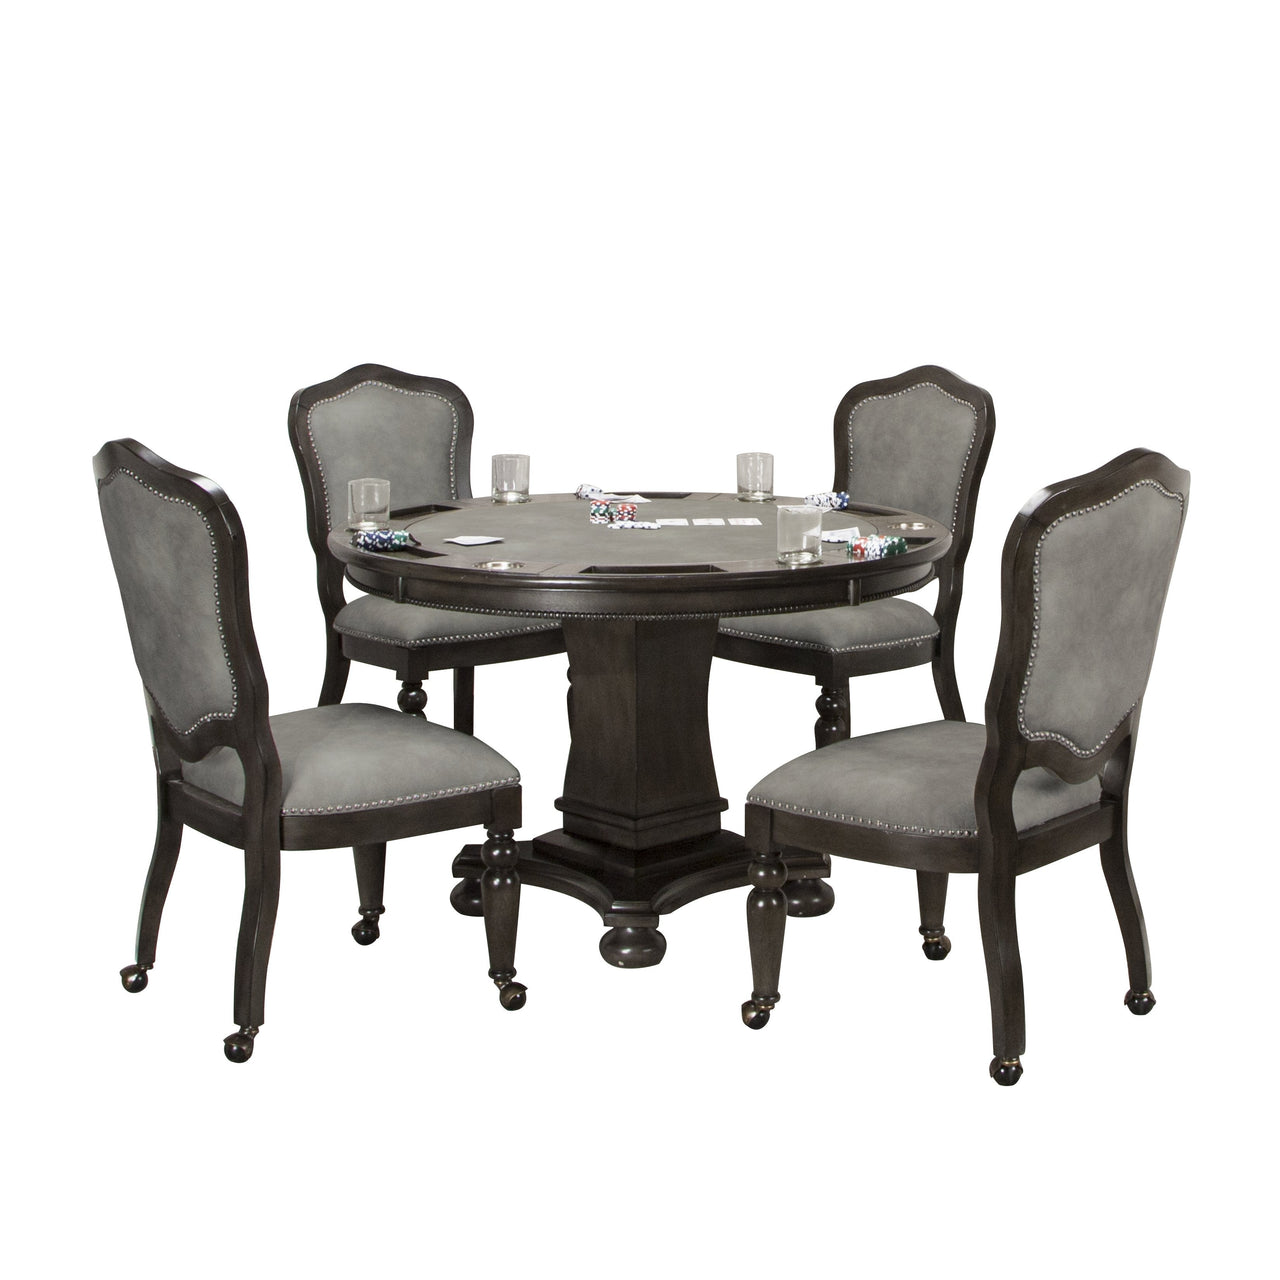 Convertible Poker & Dining Table Set Vegas With 4 matching chairs-AMERICANA-POKER-TABLES